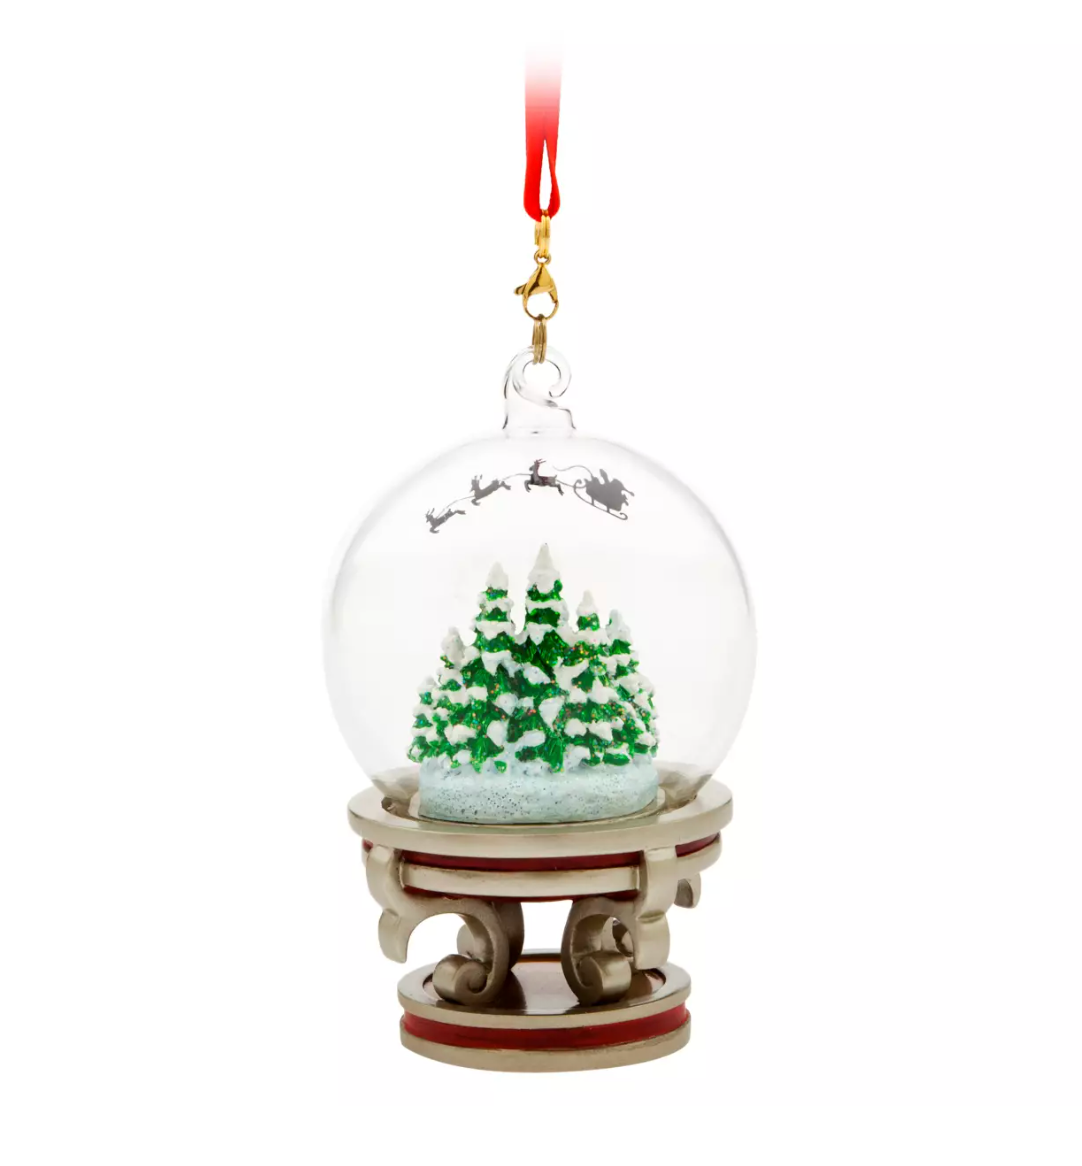 Disney Sketchbook The Santa Clause Snow Globe Christmas Ornament New with Tag